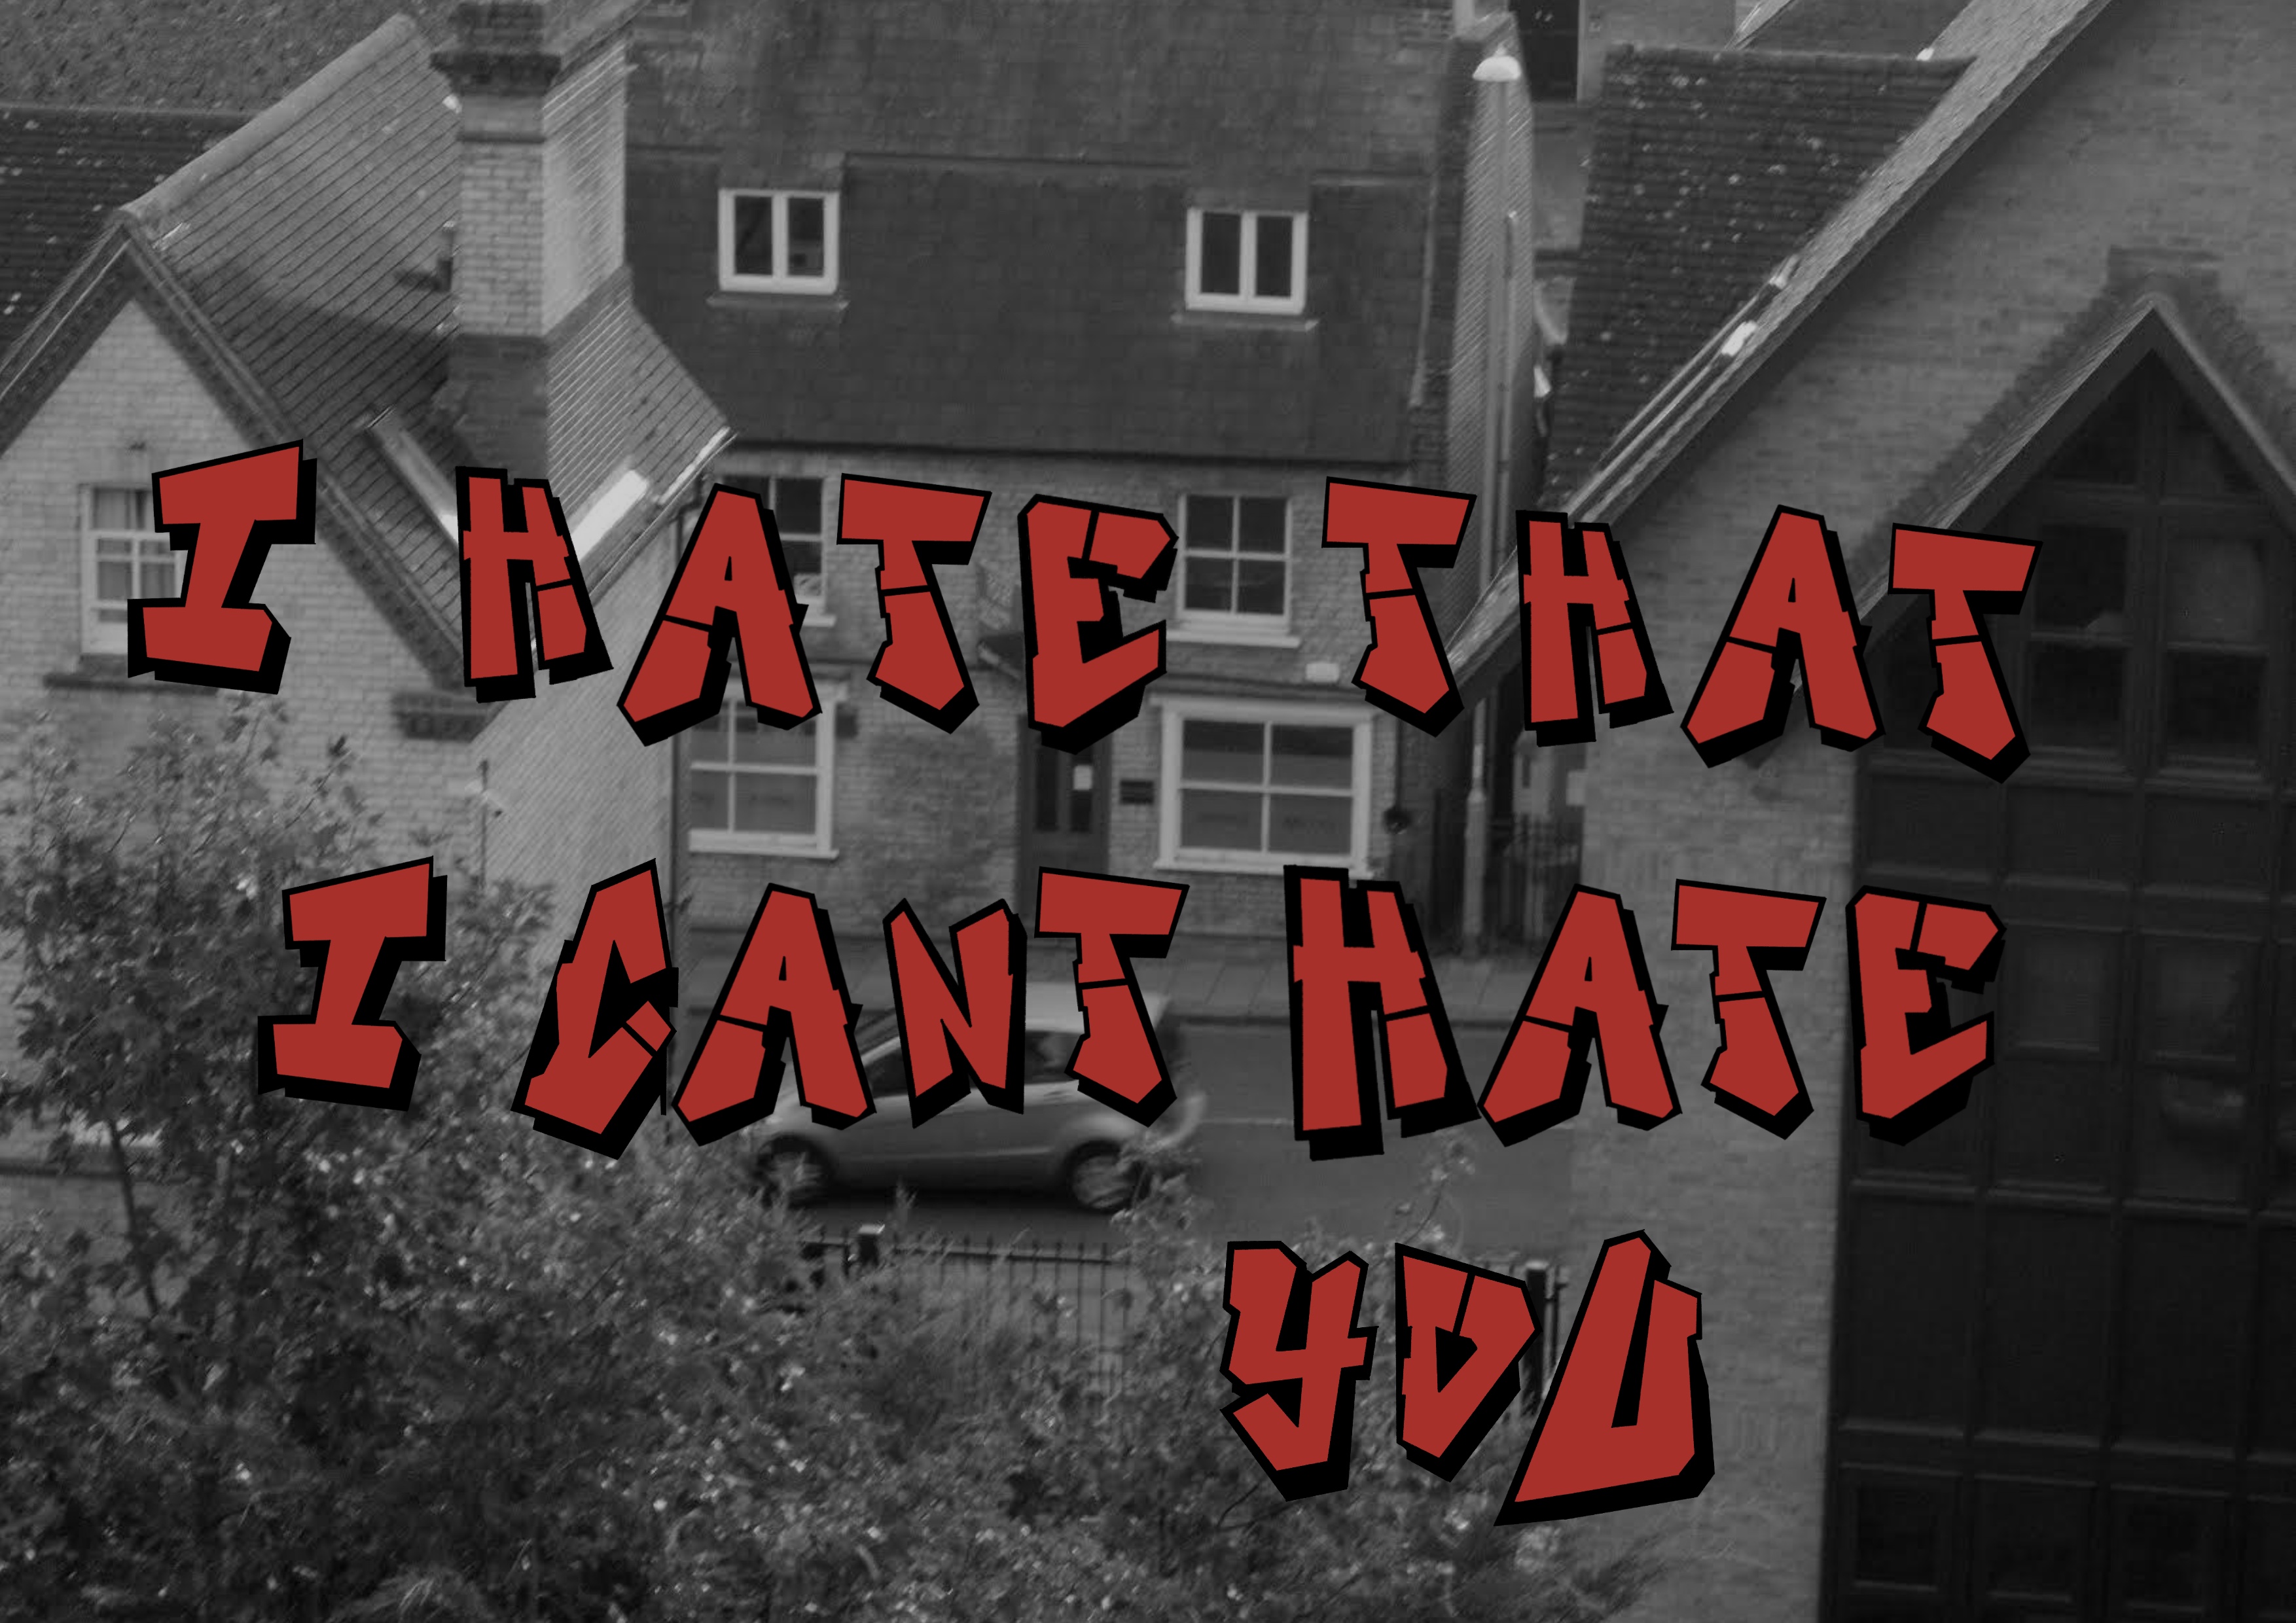 Monochrome photo of houses from above with legend “I hate that I can’t hate you”